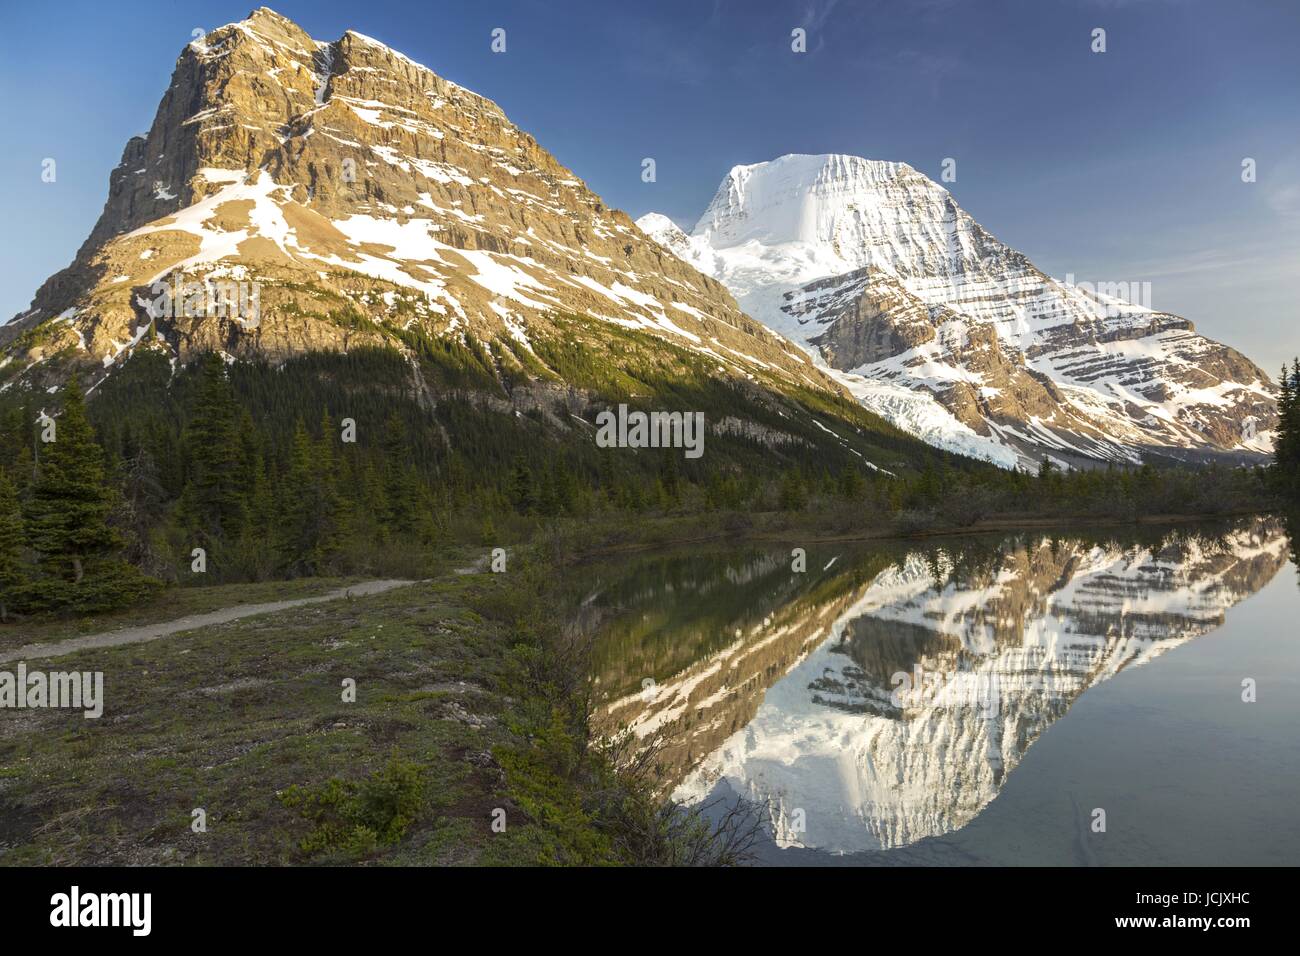 Still Water Reflections Landscape, Mount Robson and Rearguard Mountain Peak. Scenic Berg Lake Hiking Trail, Rocky Mountains British Columbia Canada Stock Photo